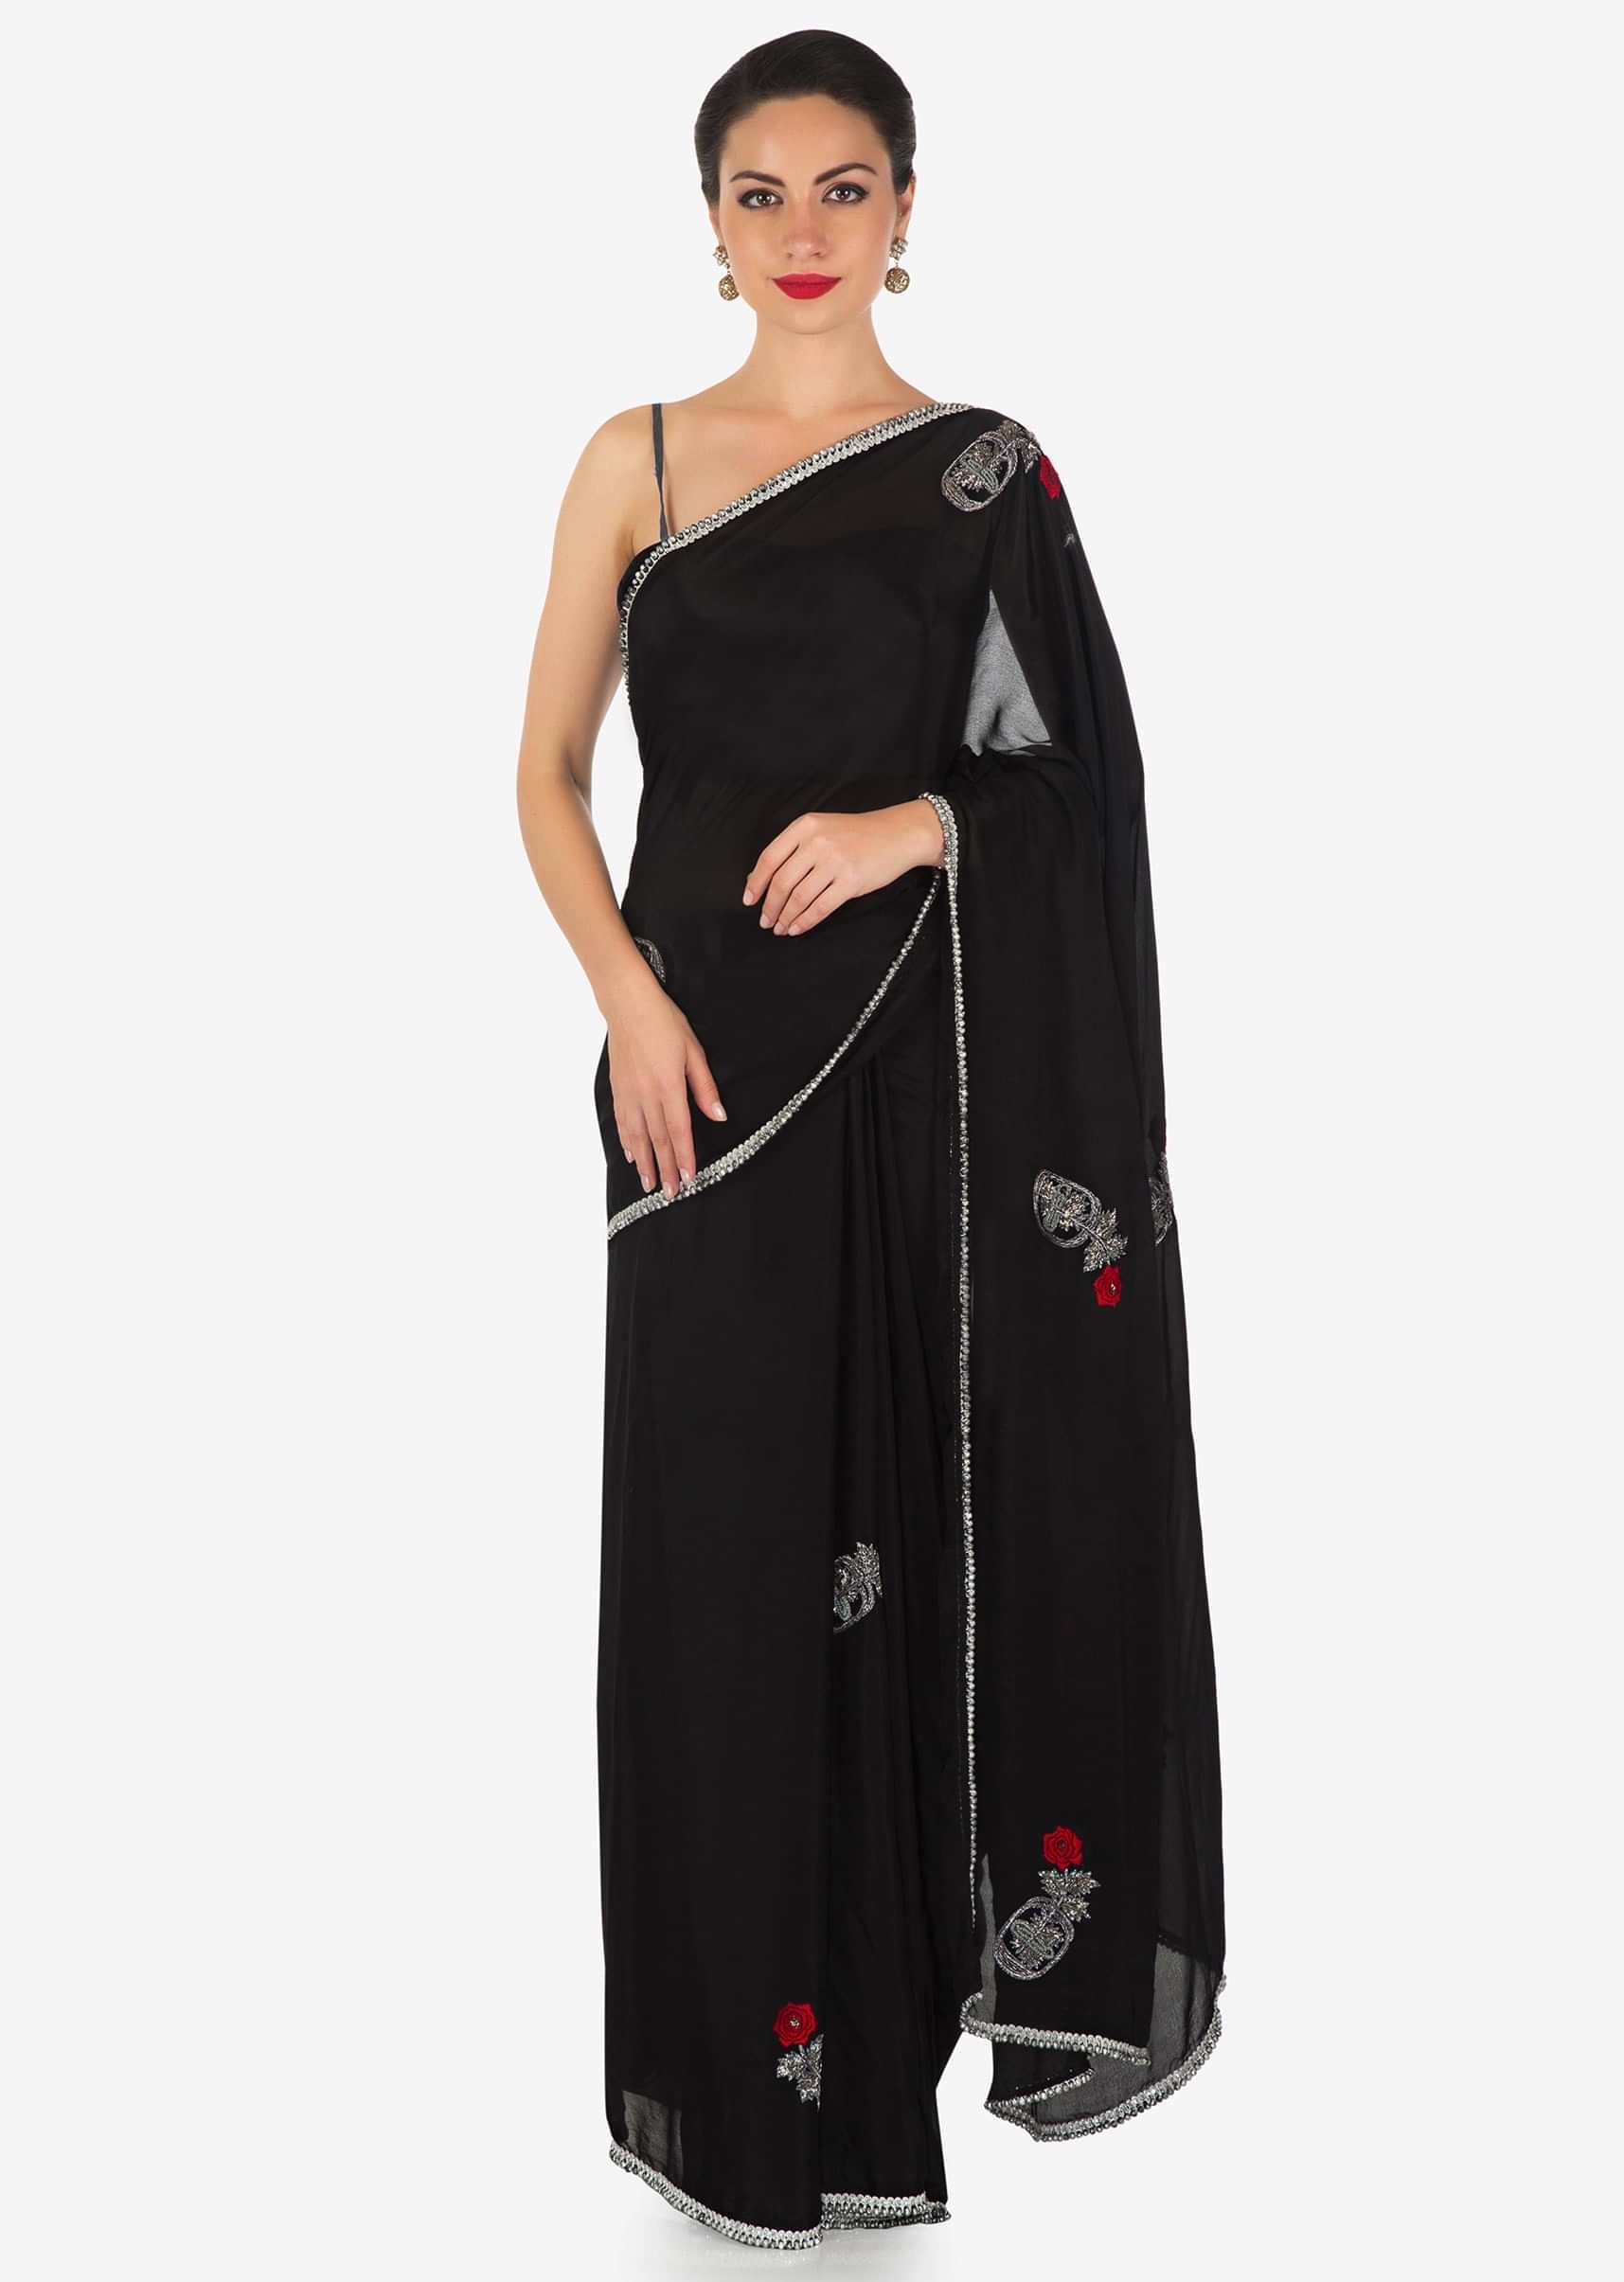 Black saree in chiffon satin with resham and cut dana embroidered butti in rose motif